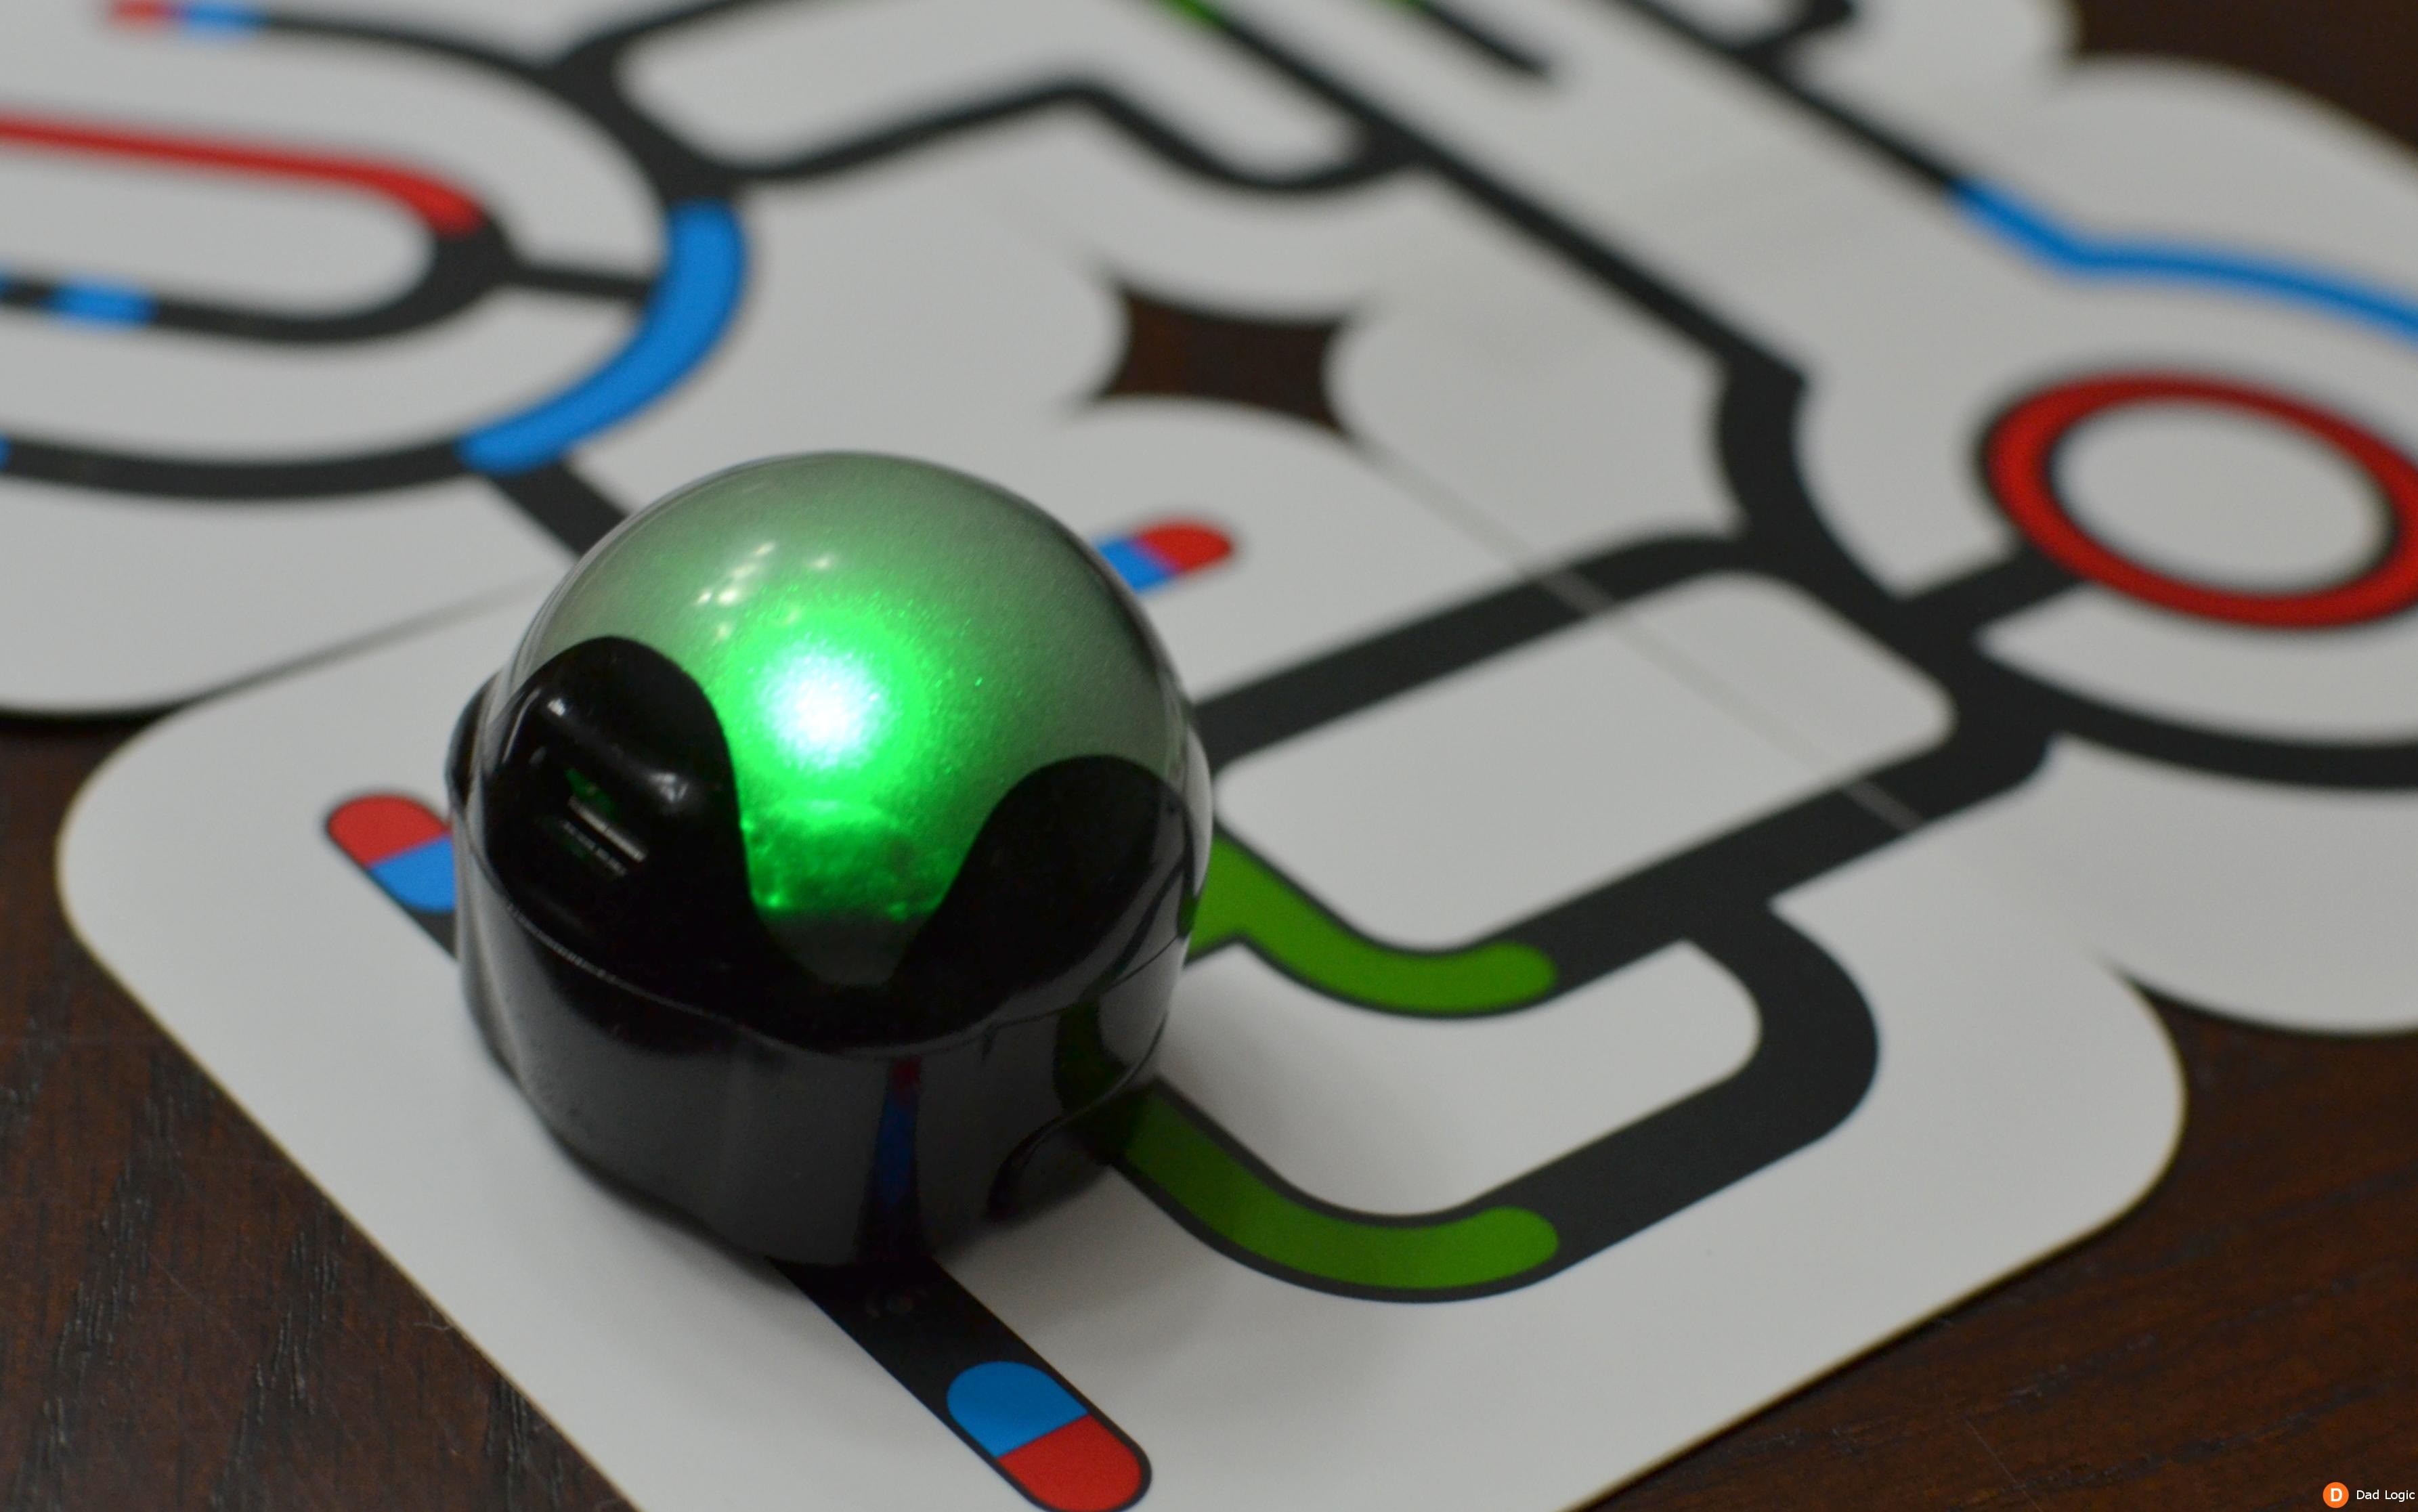 Ozobot Bit is Amazing Robot Your Child Can Program - Dad Logic